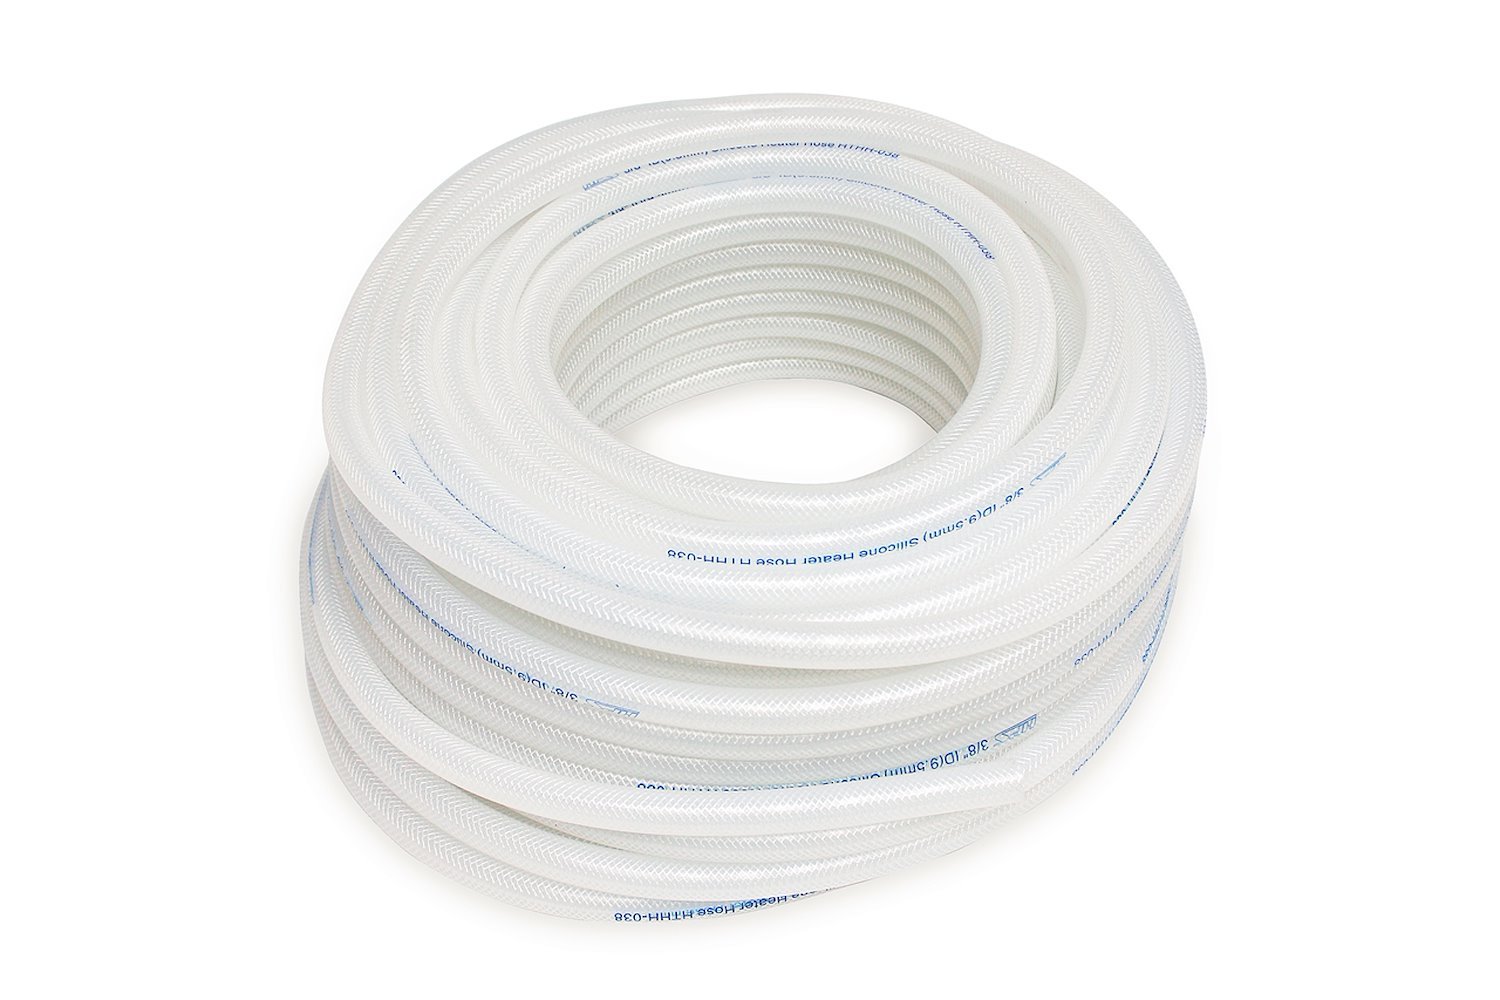 HTHH-032-CLEARx25 Silicone Heater Hose Tubing, High-Temp Reinforced, 5/16 in. ID, 25 ft. Roll, Clear